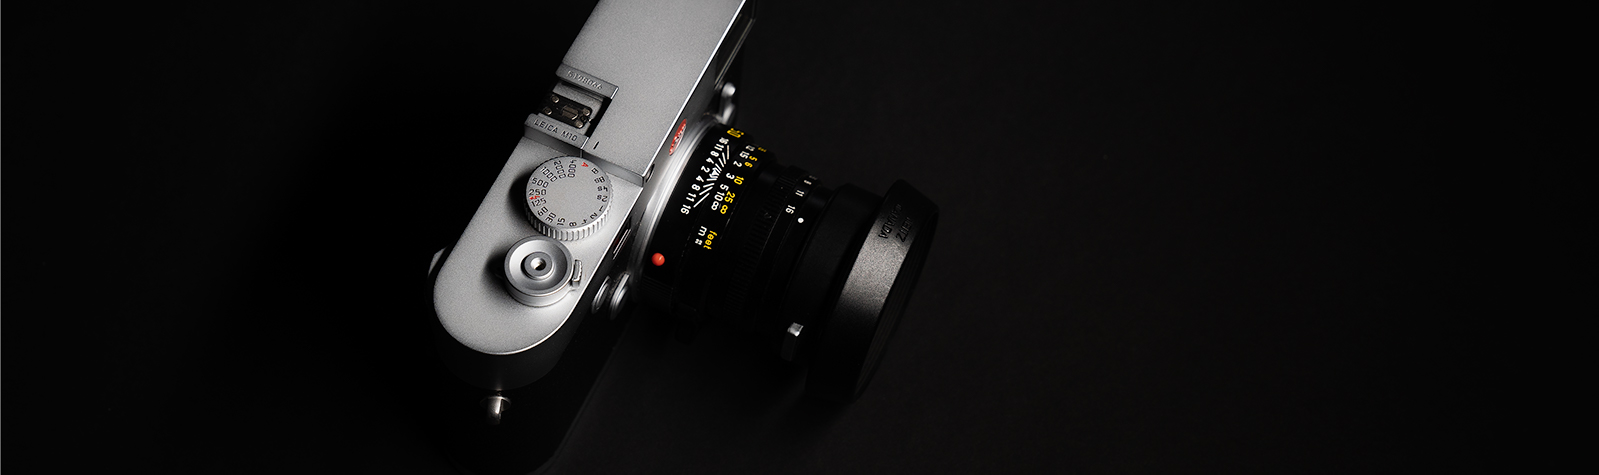 Leica Summicron 50mm V4 Review